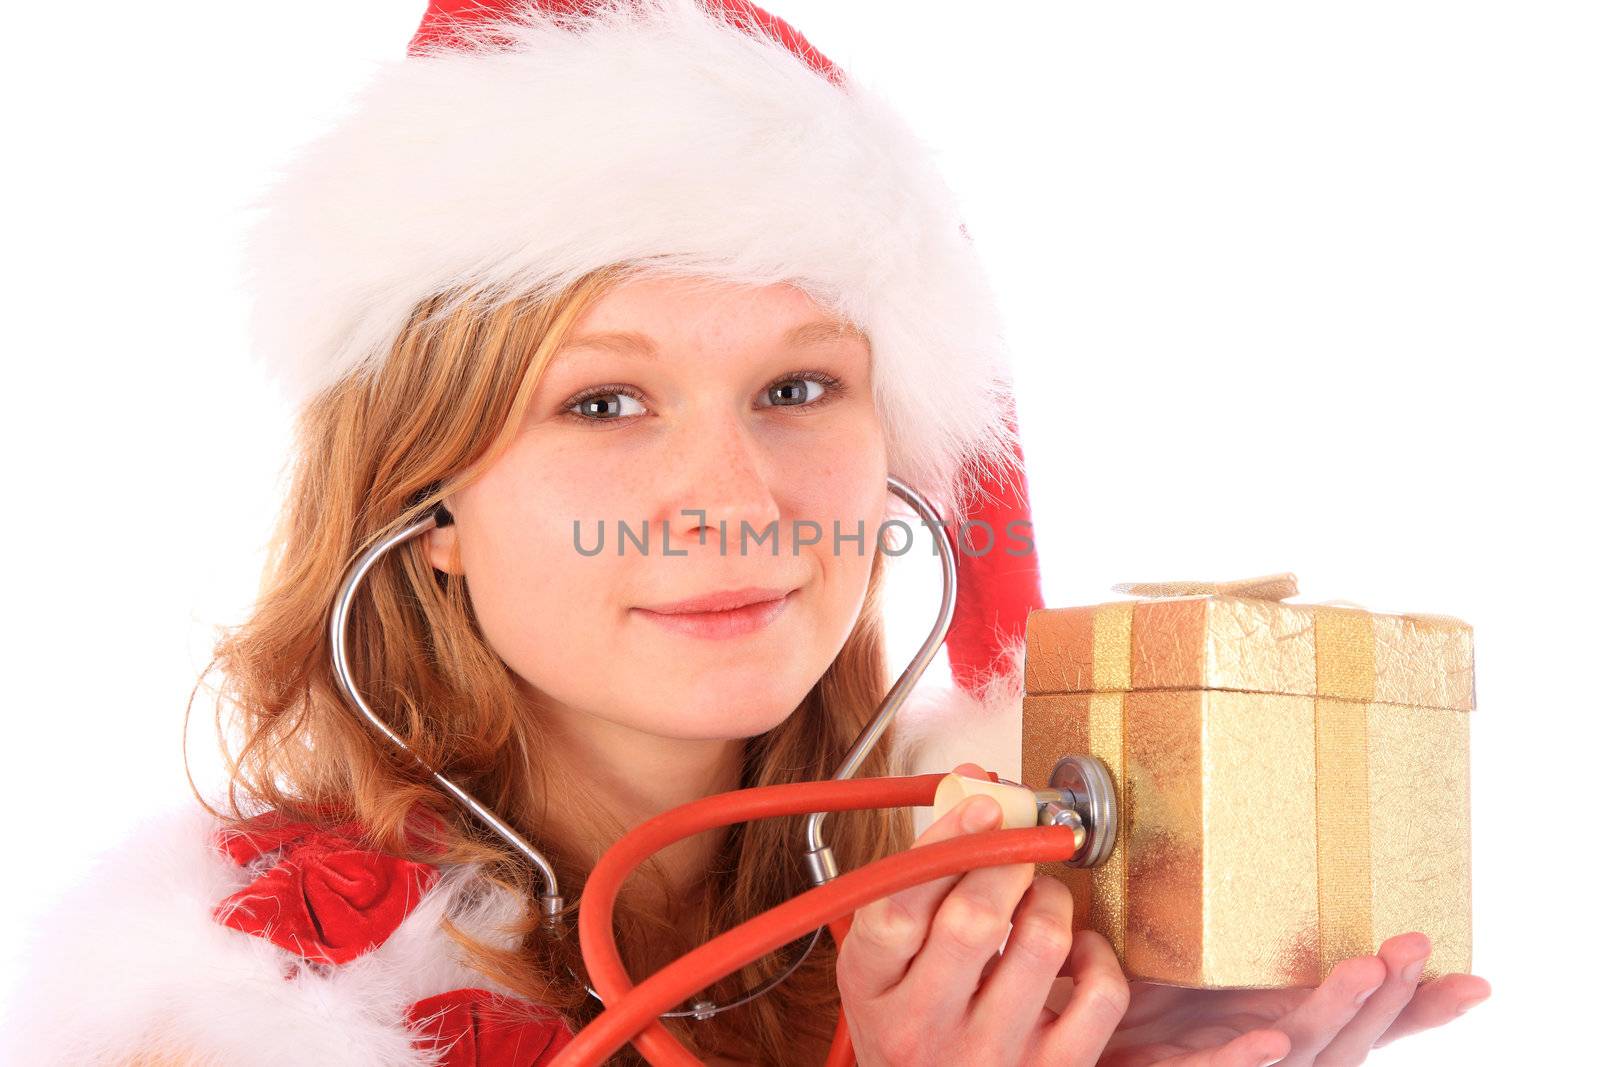 miss santa is sounding a golden gift box with a stetoscope to check out the gift box content - smiling at the camera